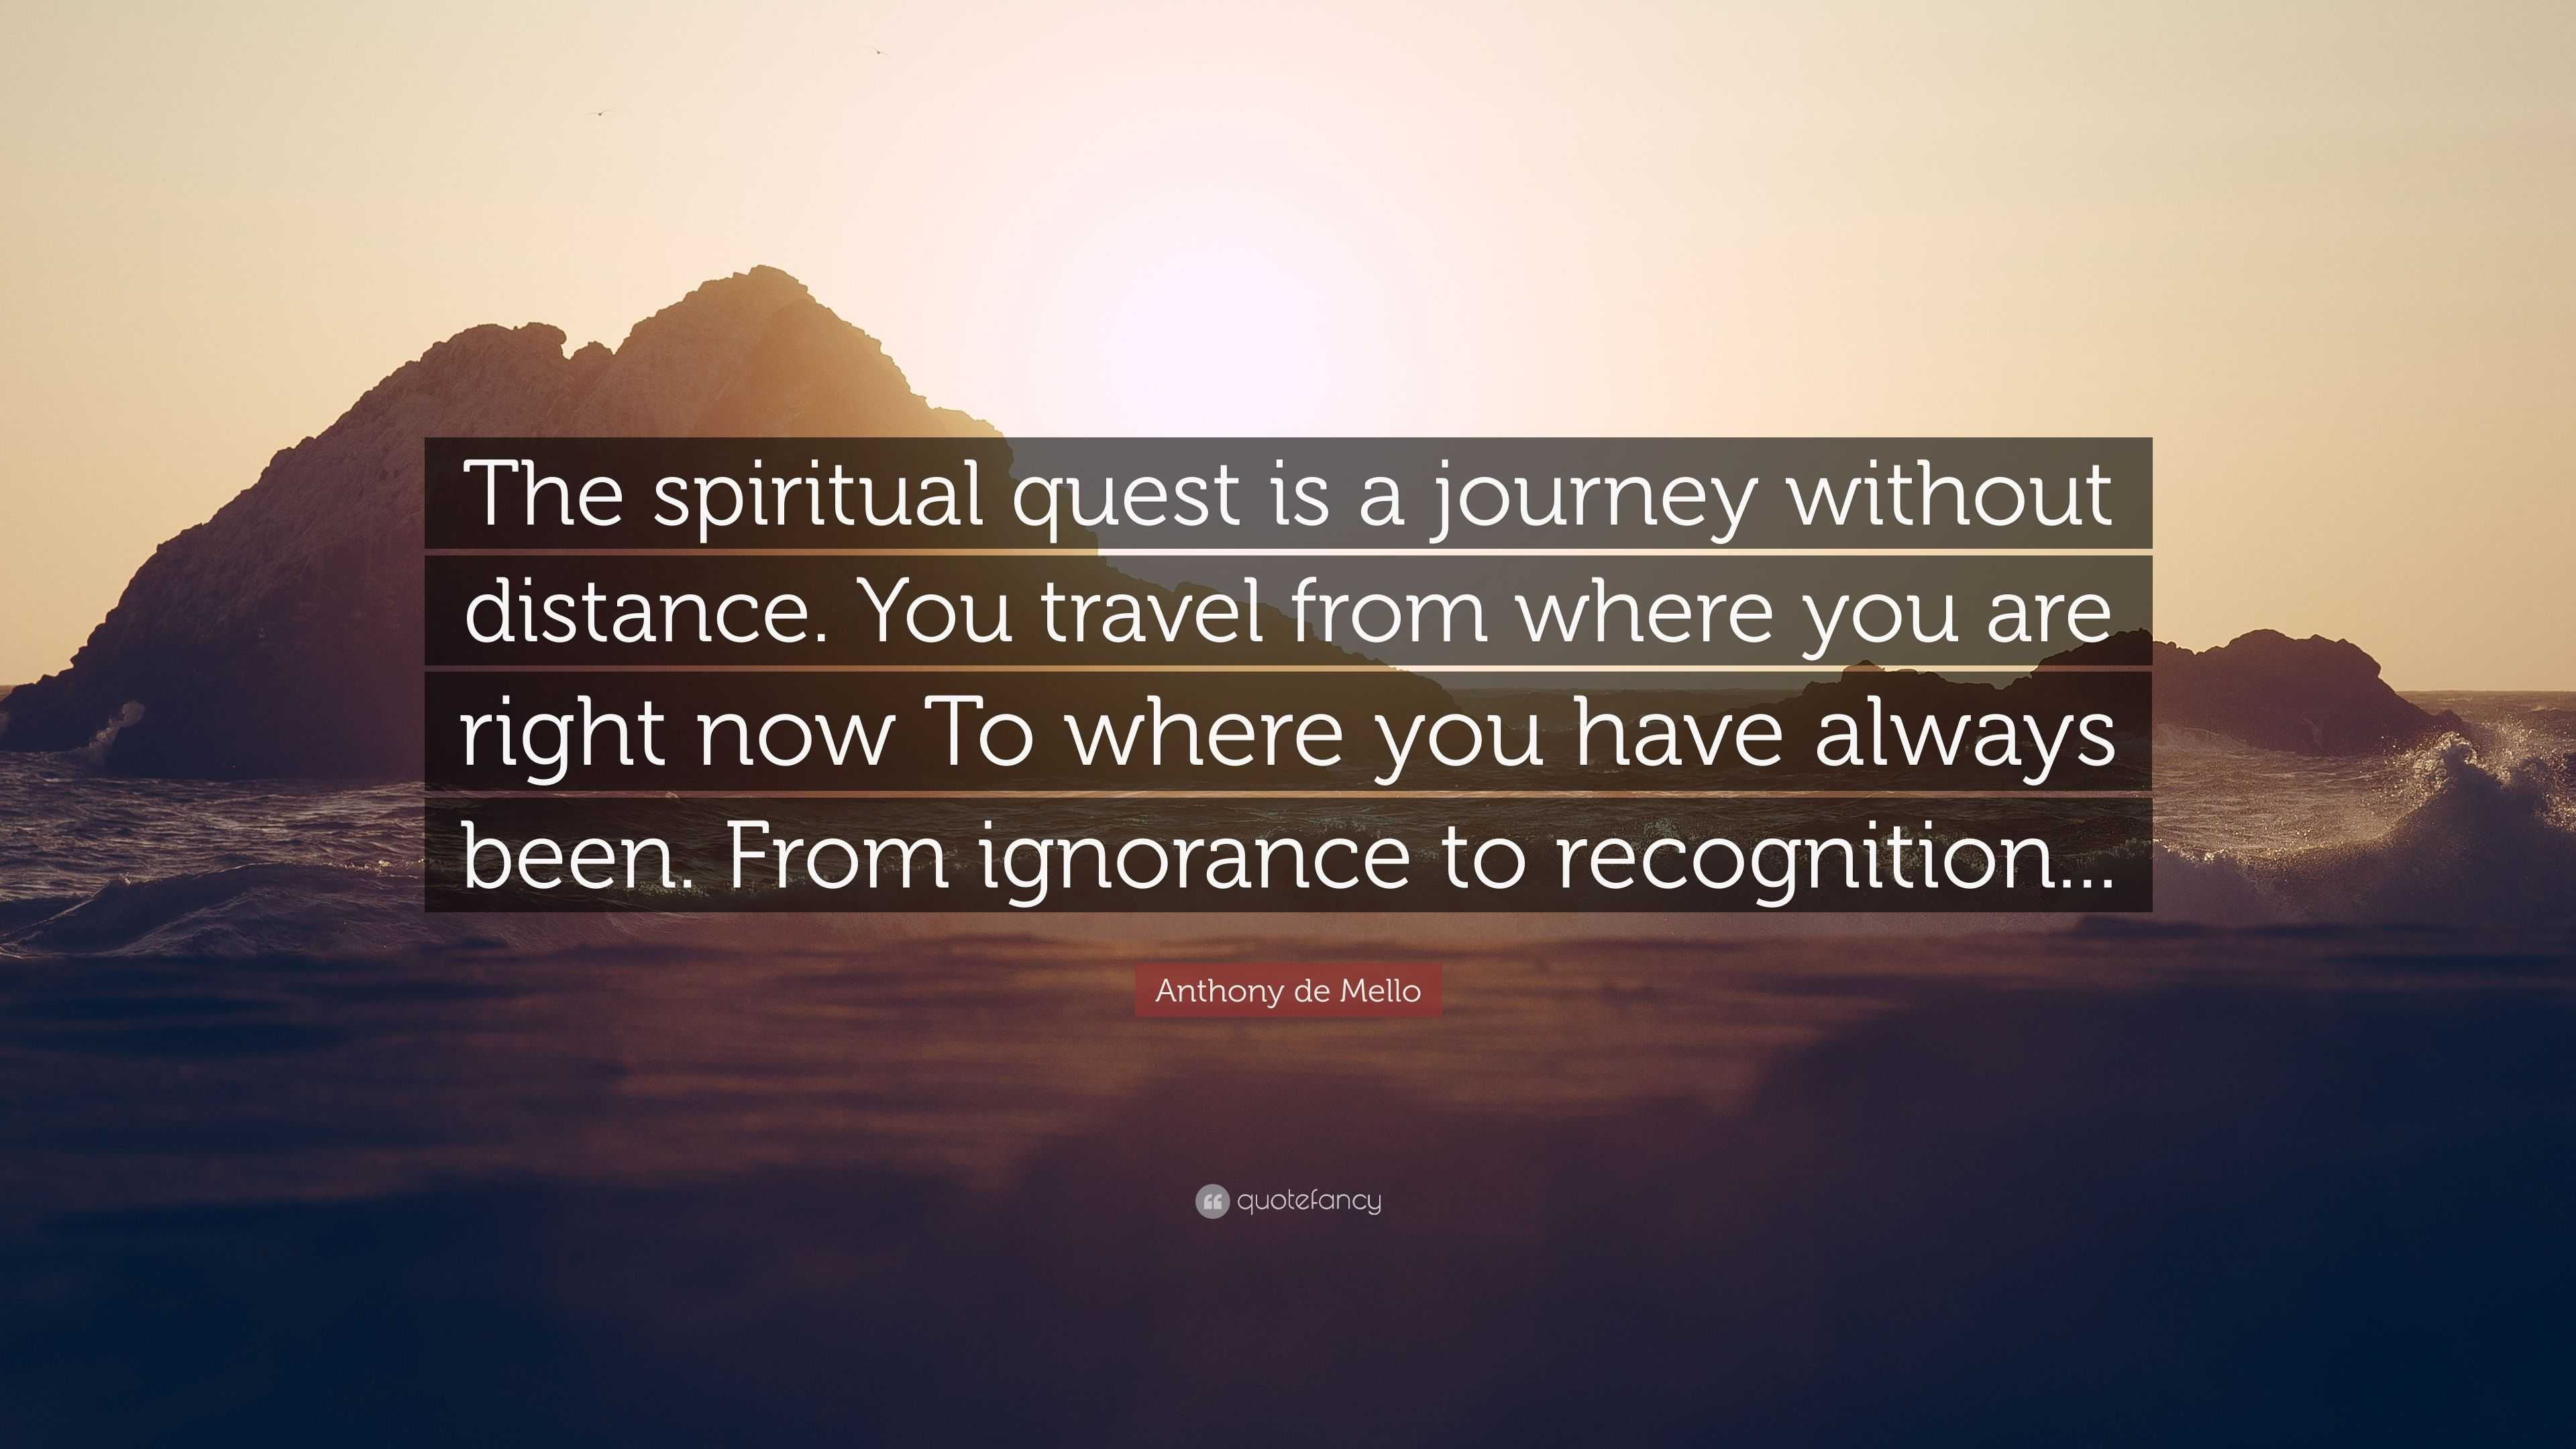 Anthony de Mello Quote: “The spiritual quest is a journey without ...